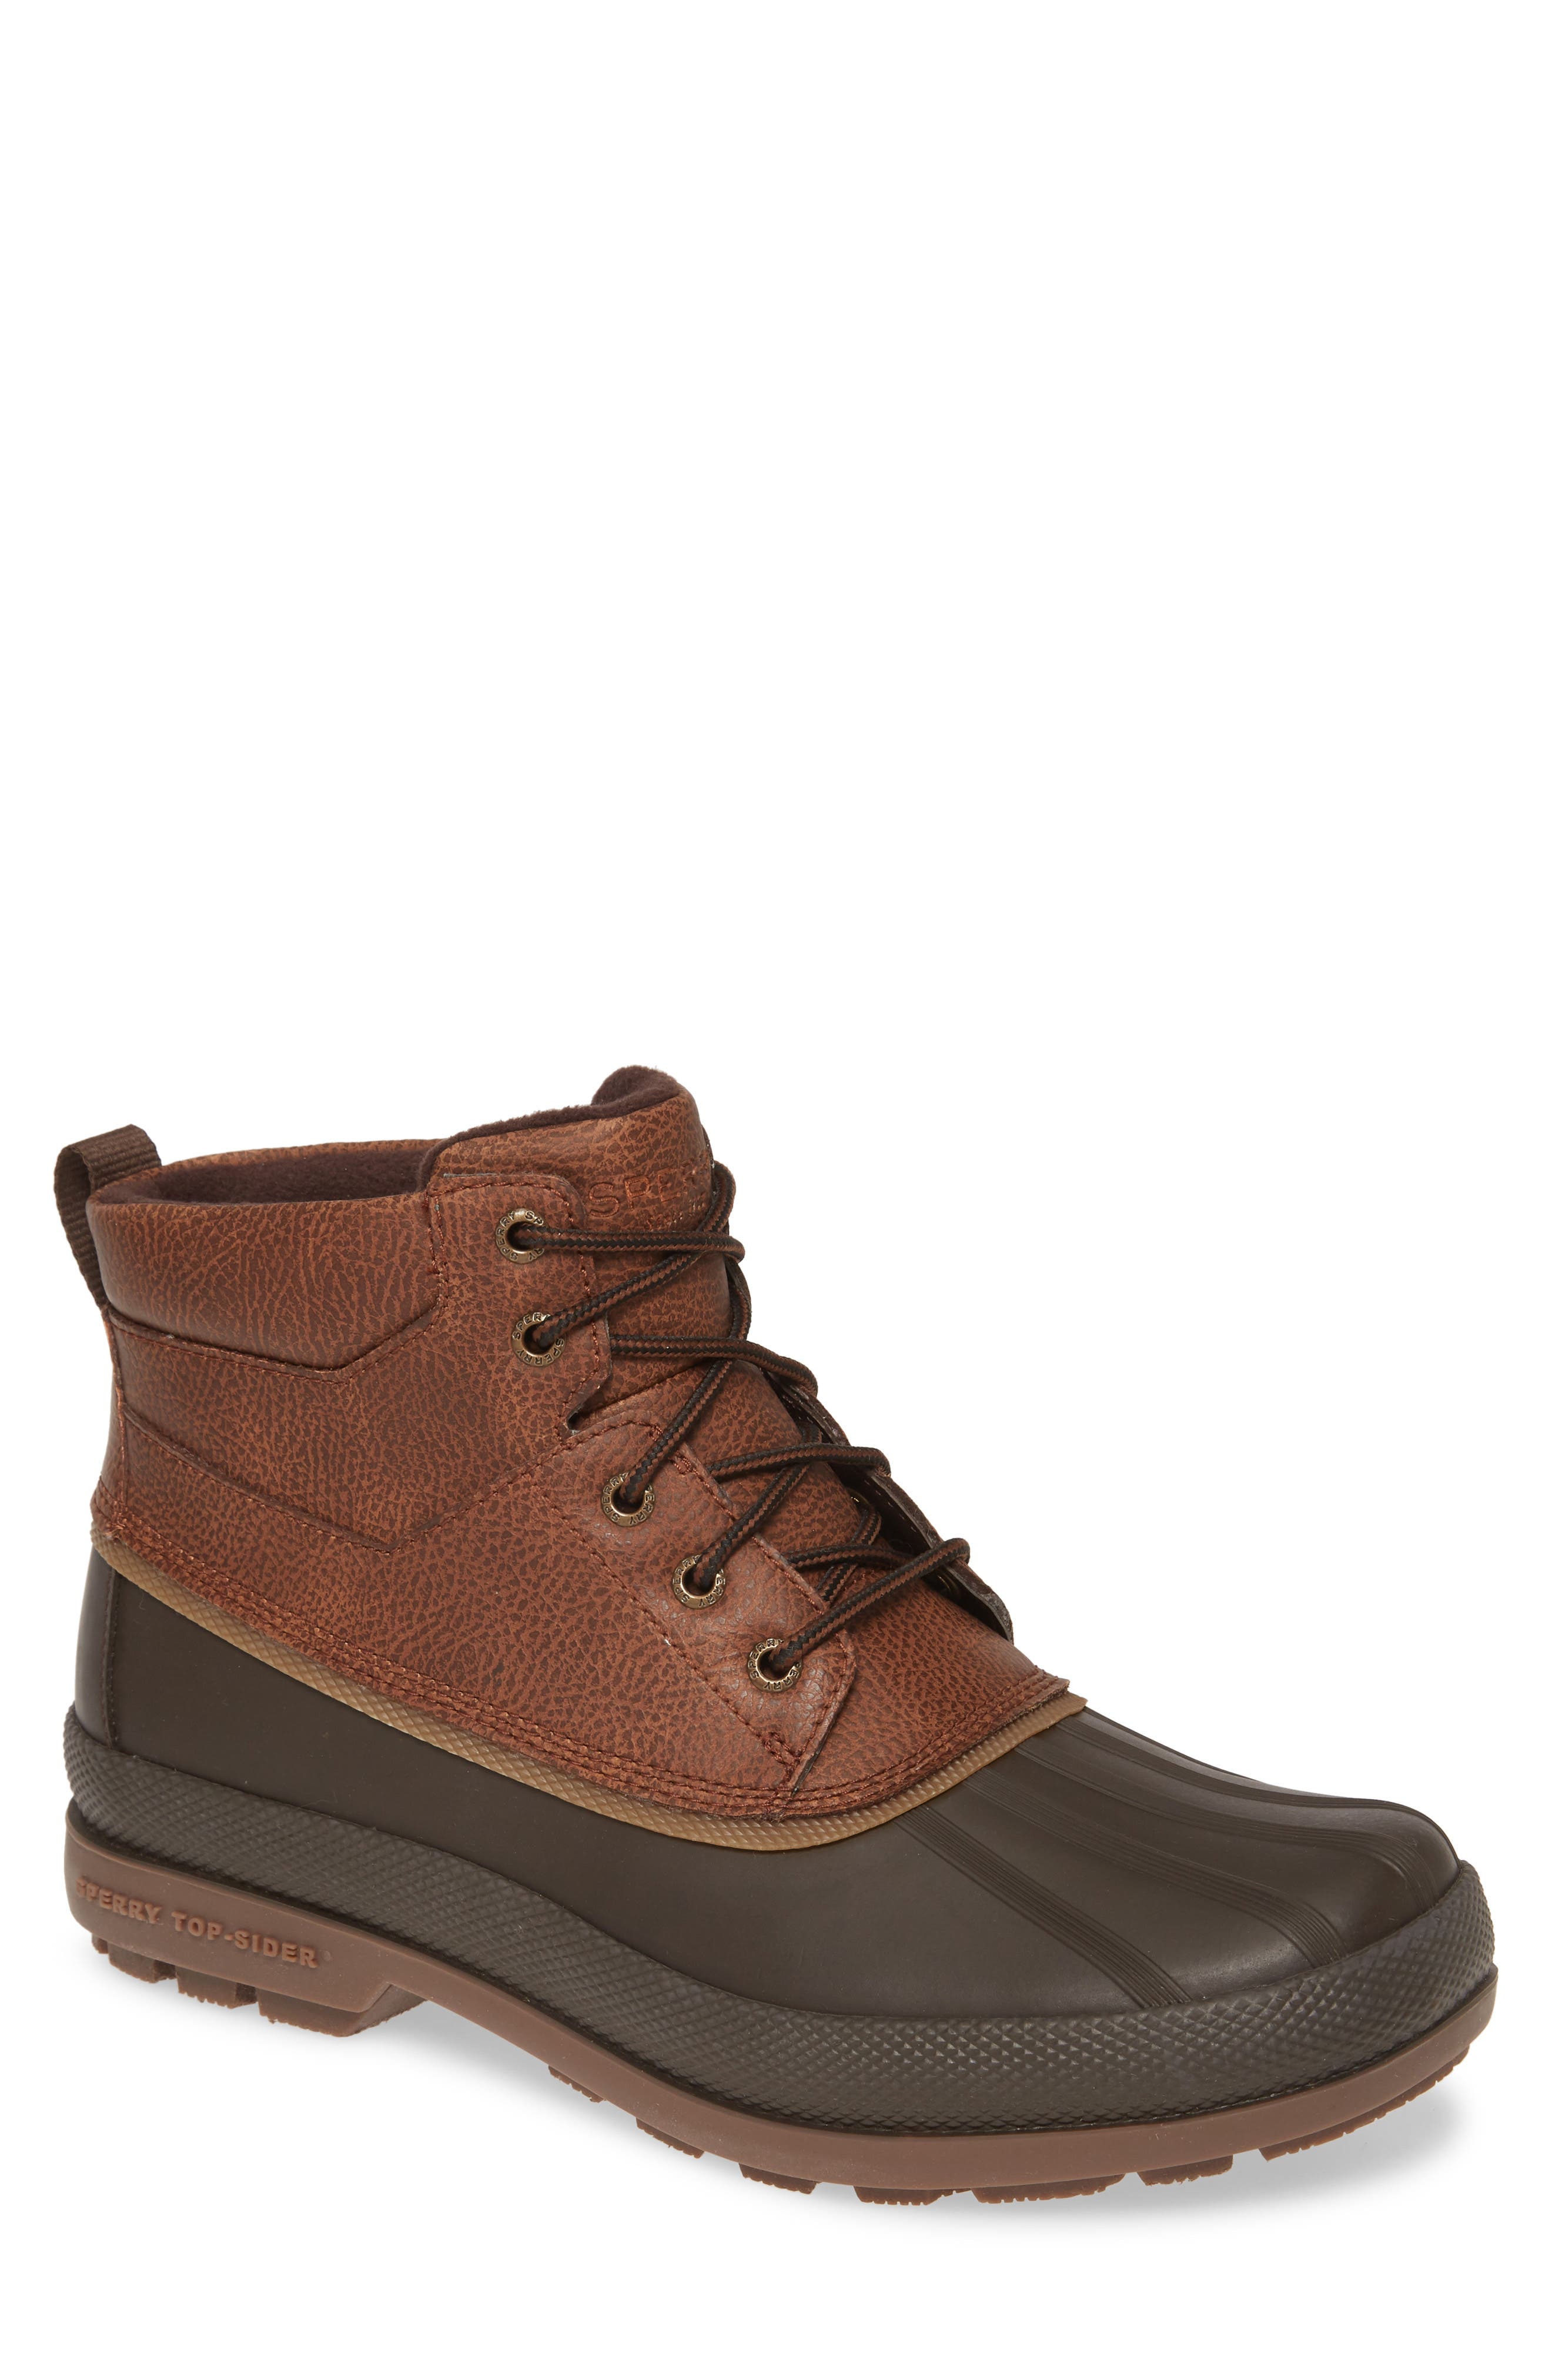 sperry snow boots mens